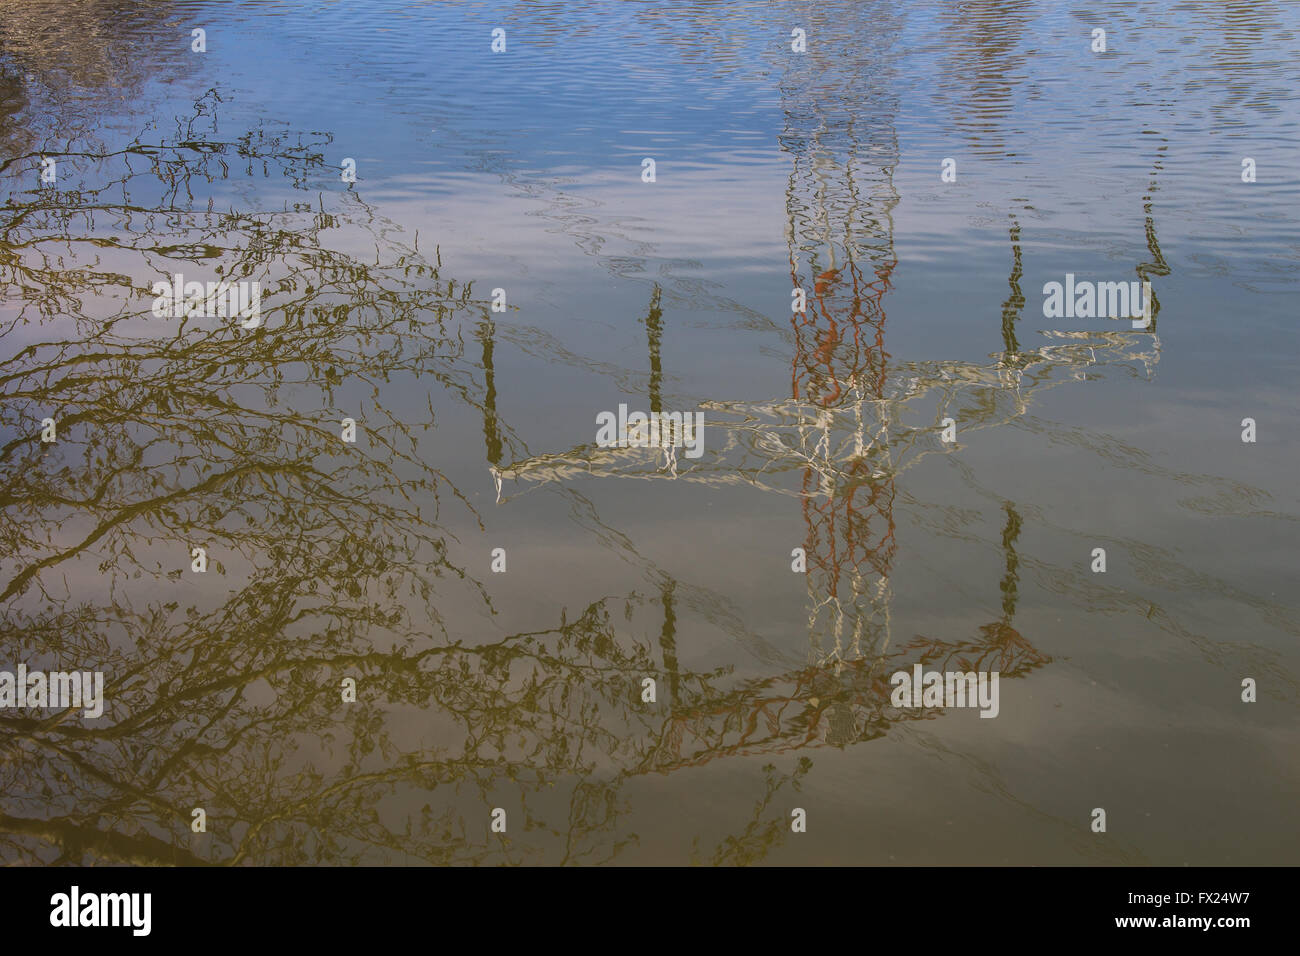 Surface of the water in the lake with small waves, reflecting the electricity tower, sky and twigs of a tree. Stock Photo